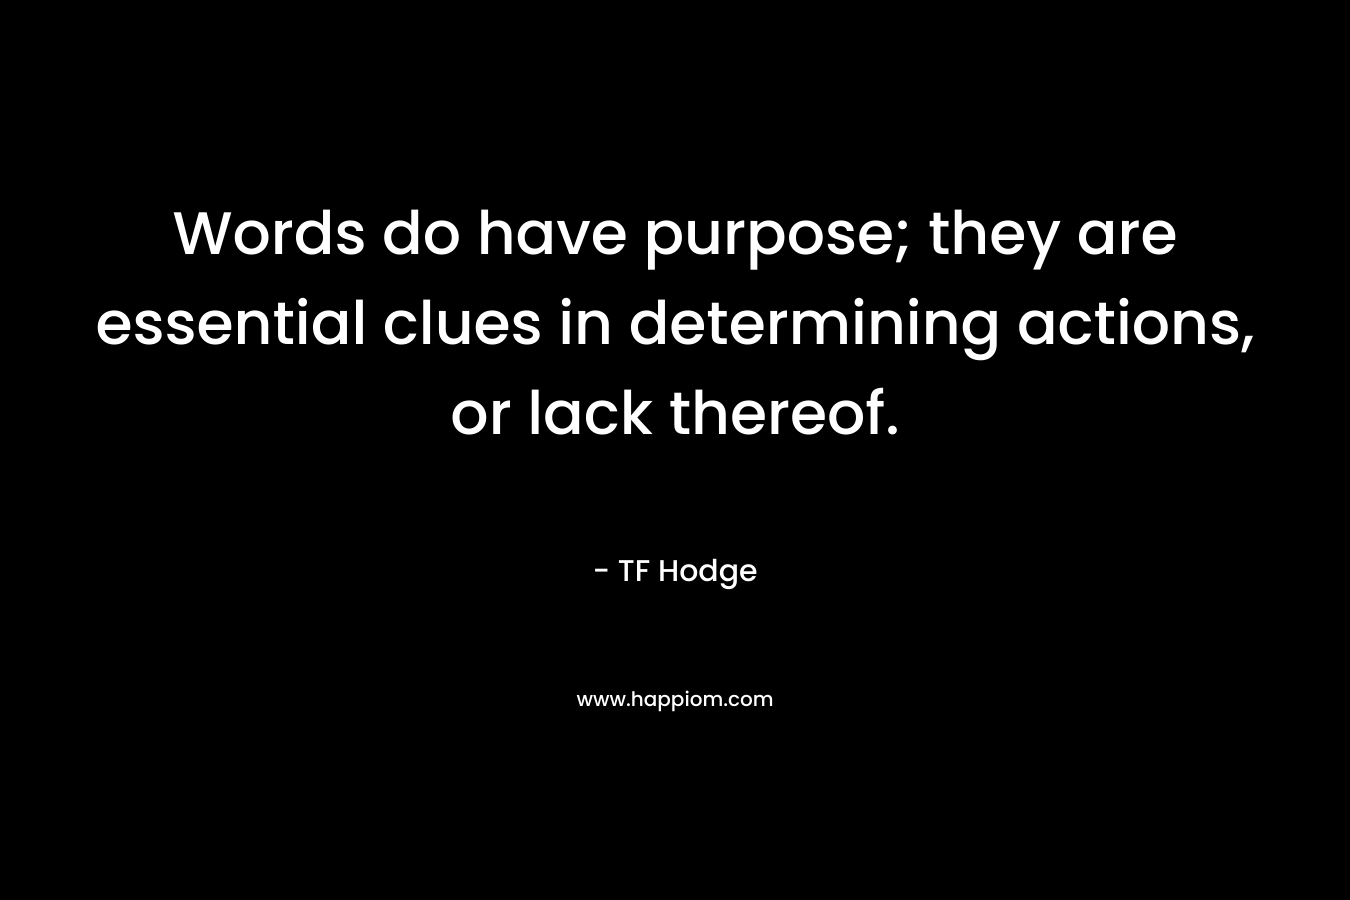 Words do have purpose; they are essential clues in determining actions, or lack thereof. – TF Hodge